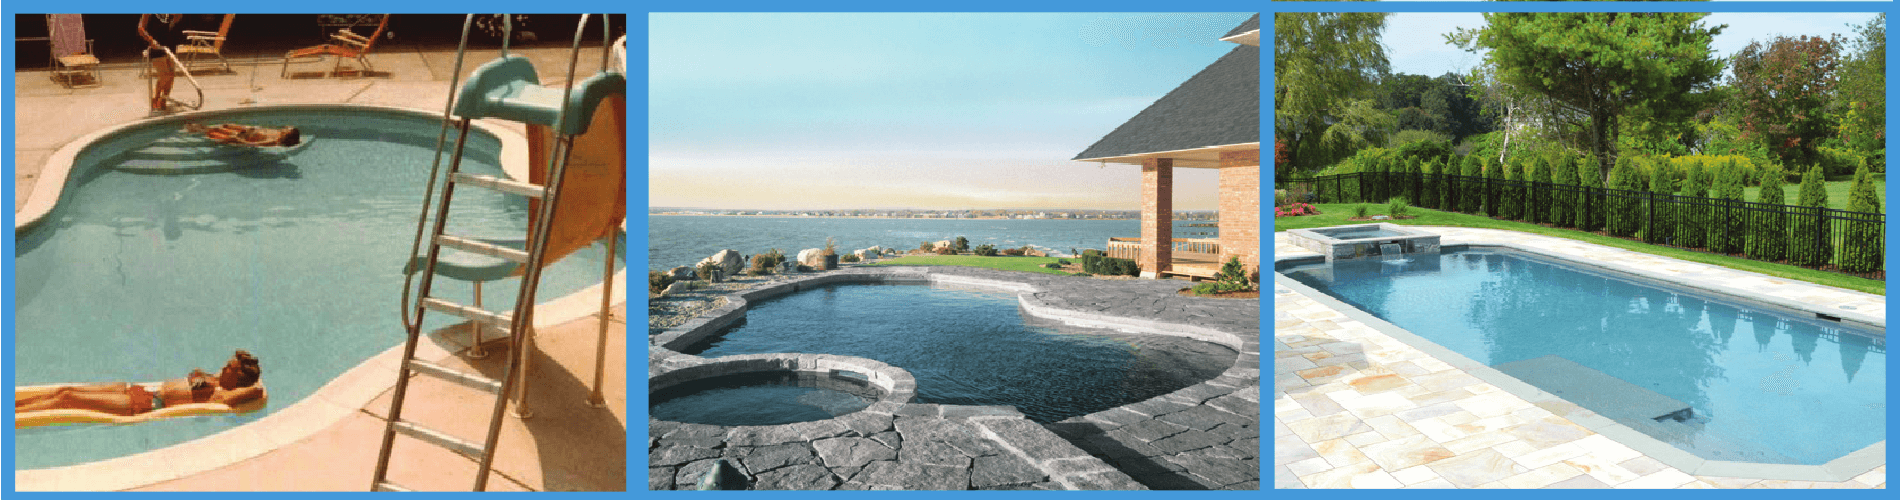 Aqua Pool & Patio gunite swimming pool construction in Connecticut showing older and newer pools